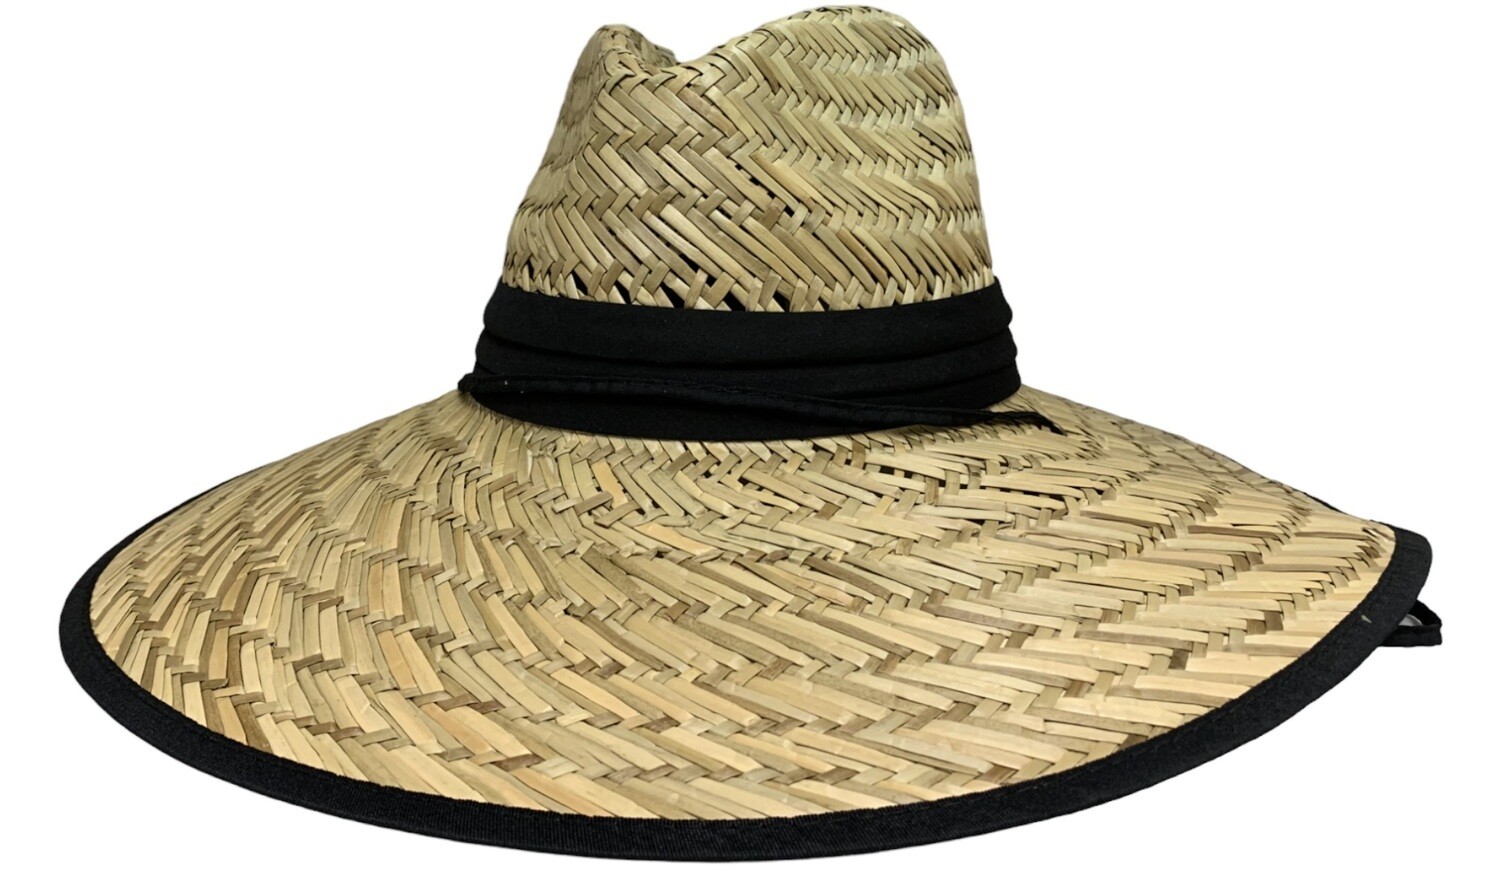 Premium Embroidered Straw Sun and Fishing Hats